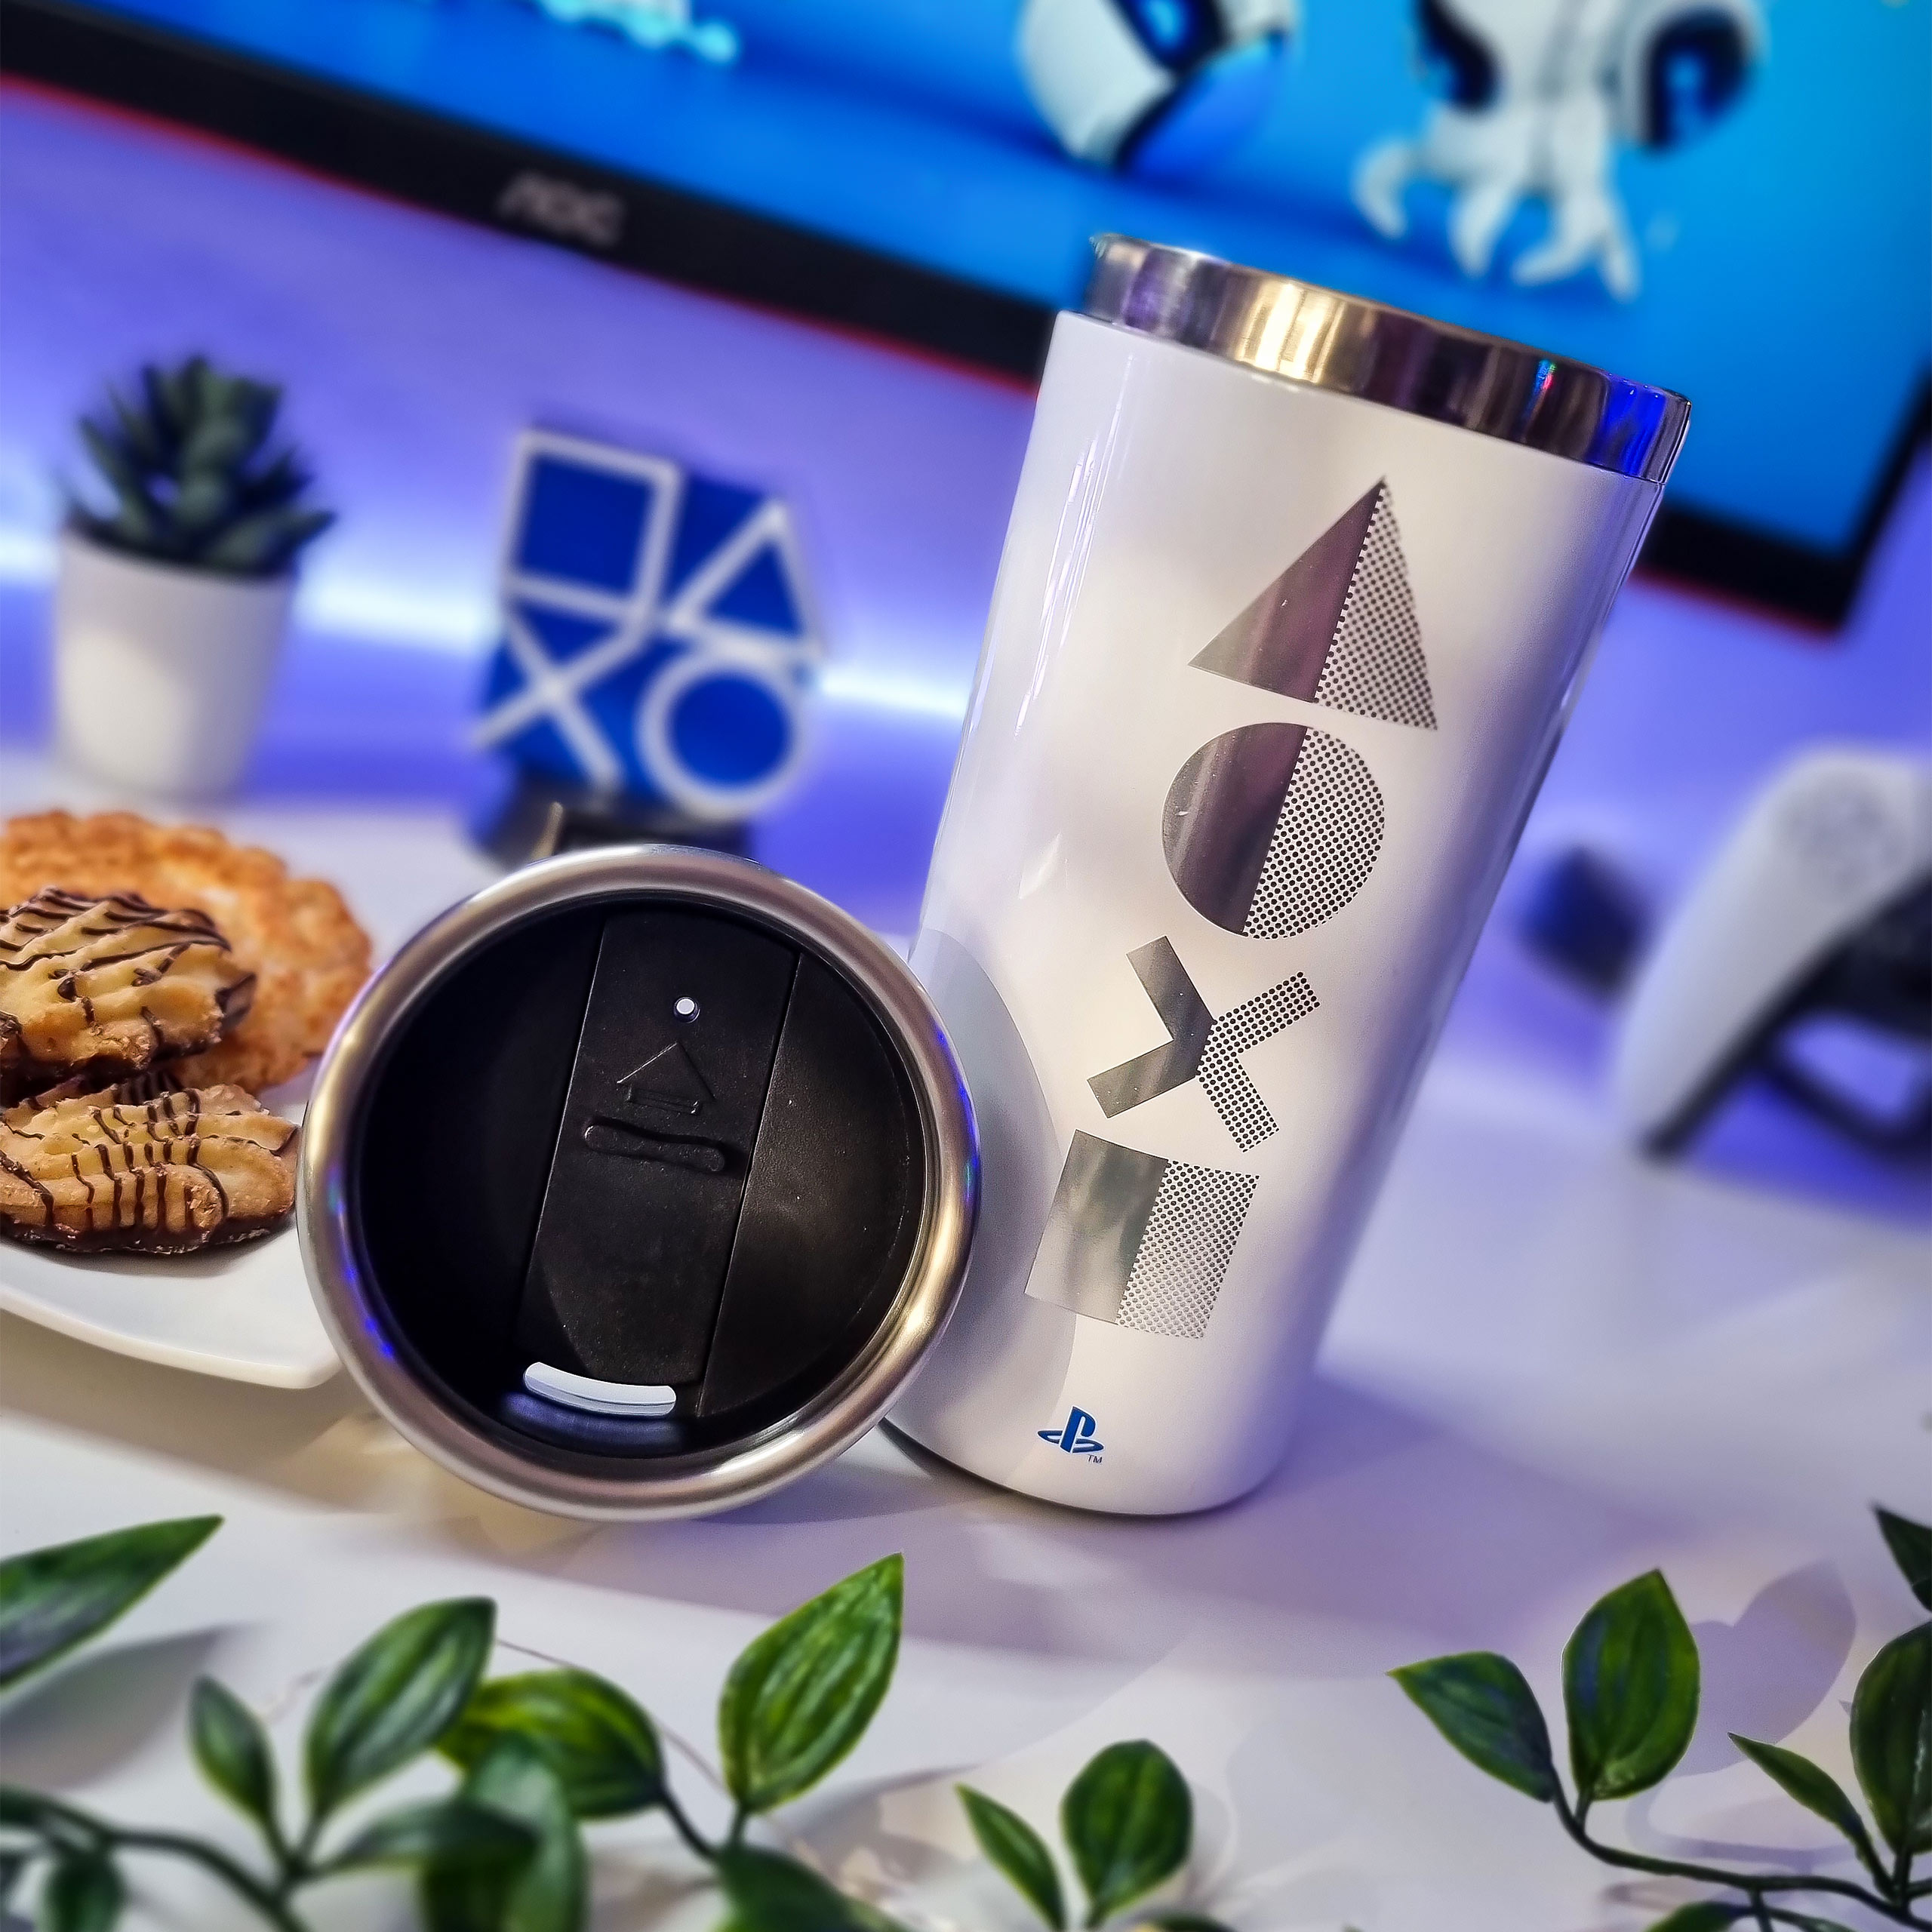 PlayStation - PS5 Buttons To Go Cup